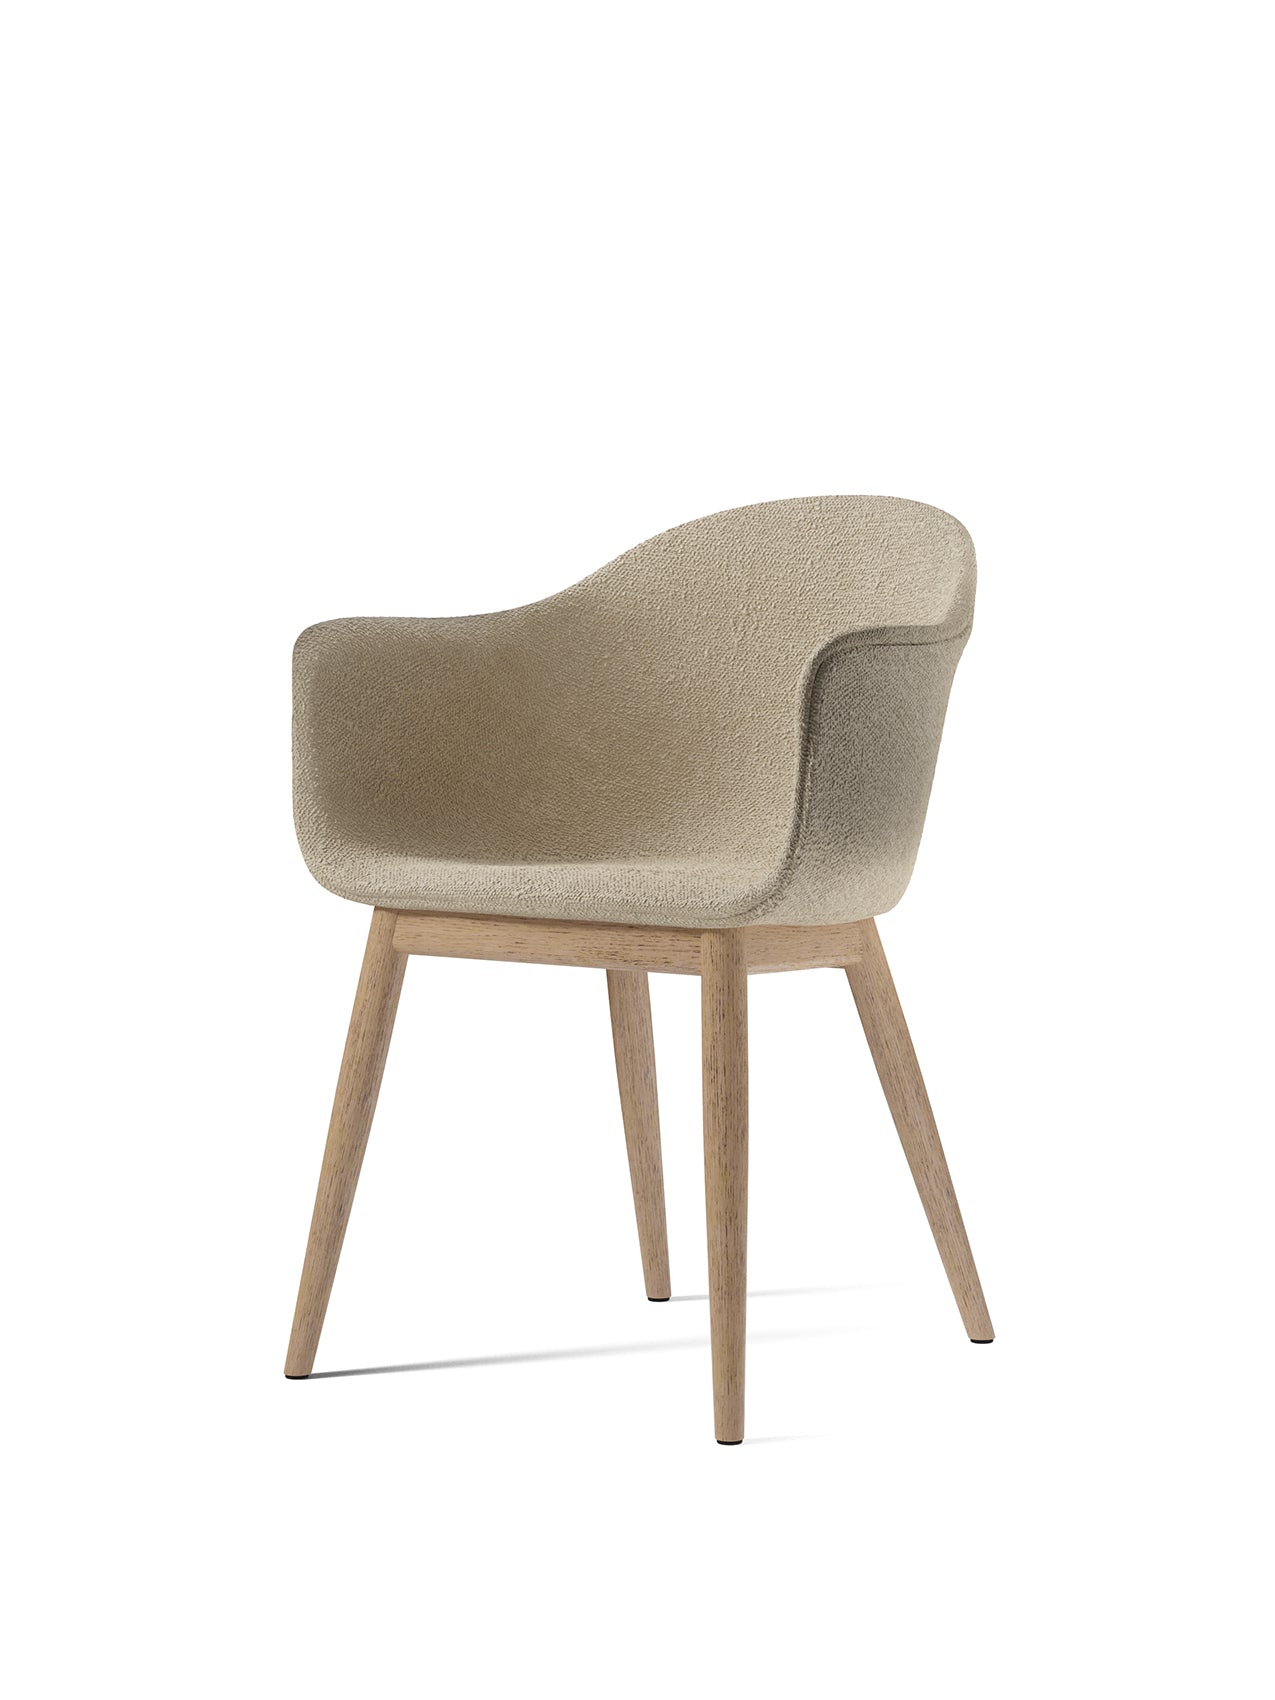 Harbour Dining Chair, Wooden Base, upholstered